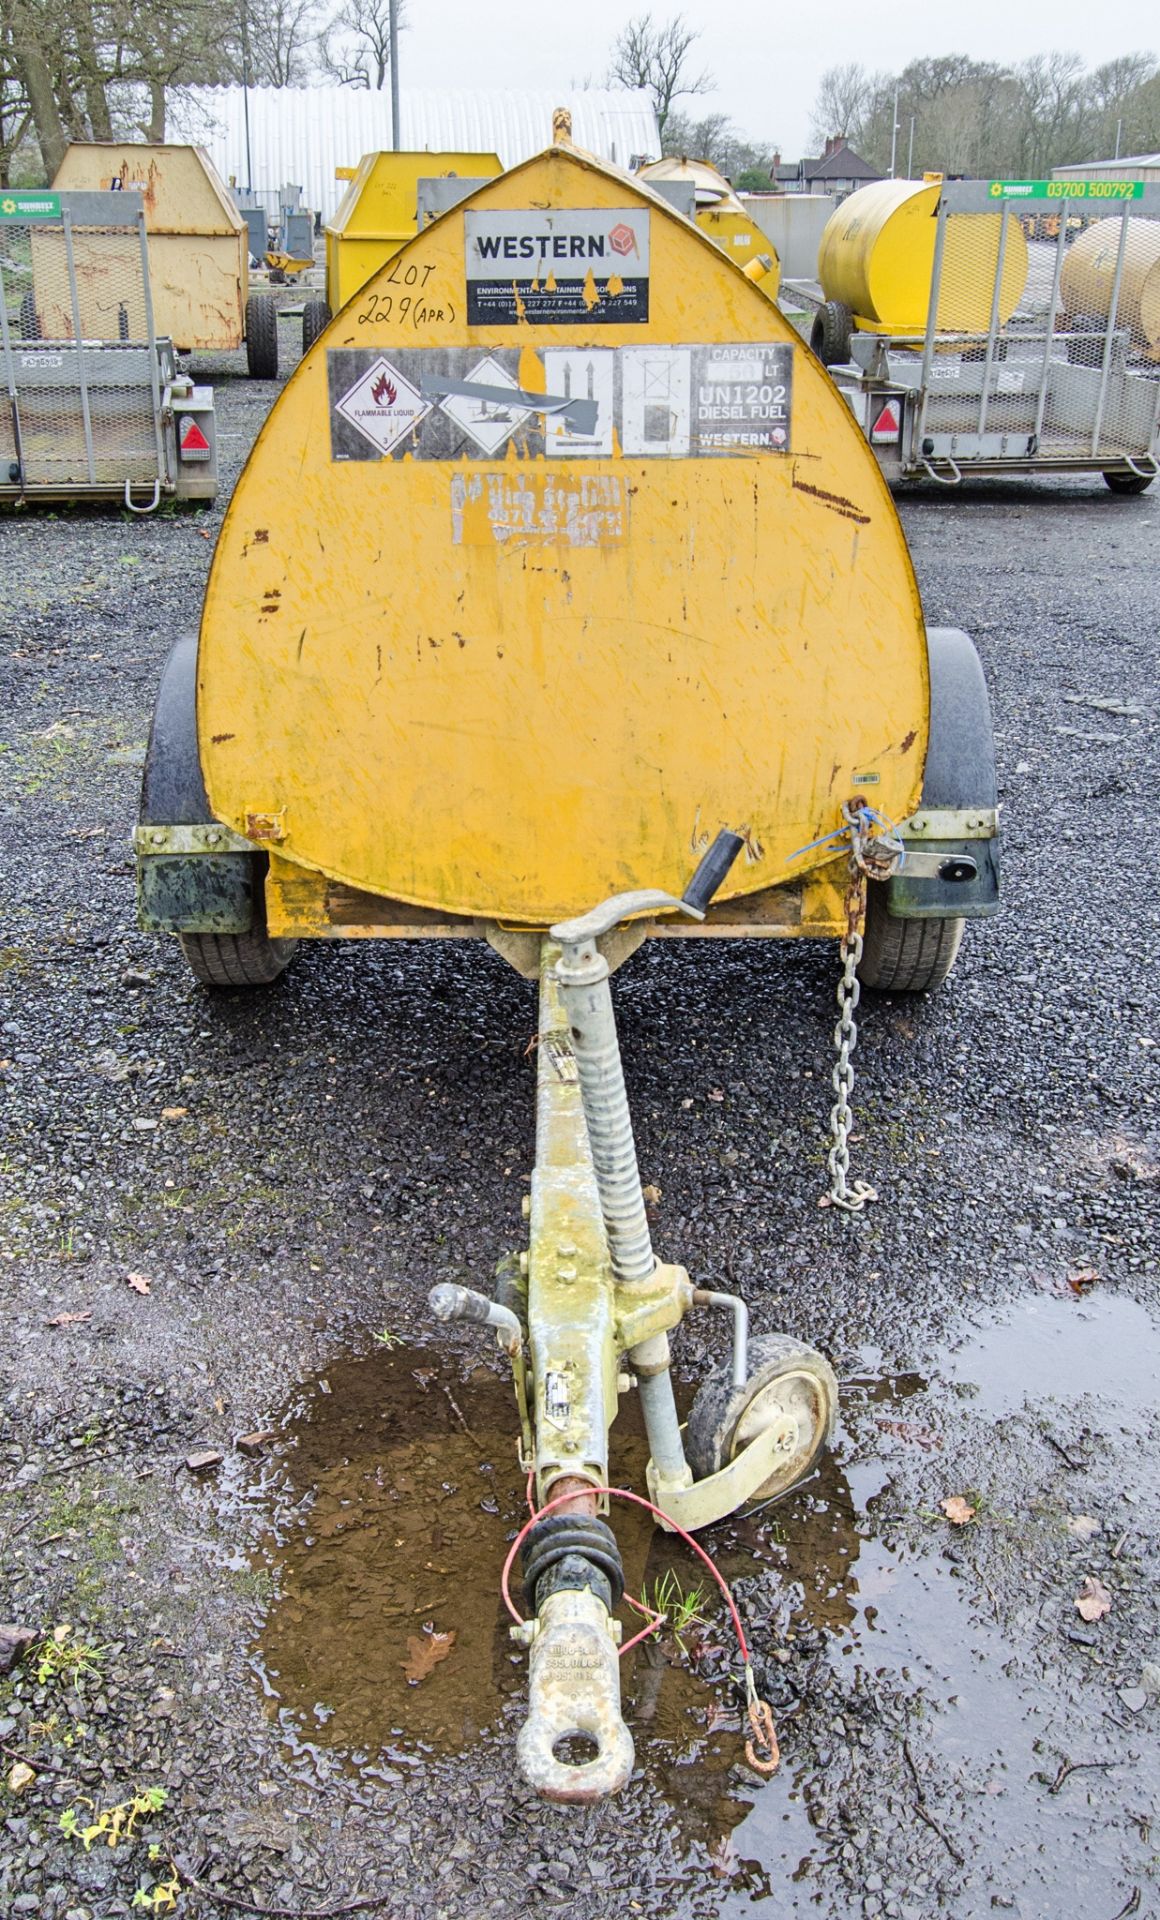 Western Abbi 950 litre fast tow bunded fuel bowser c/w manual pump, delivery hose & nozzle 14031402 - Image 5 of 7